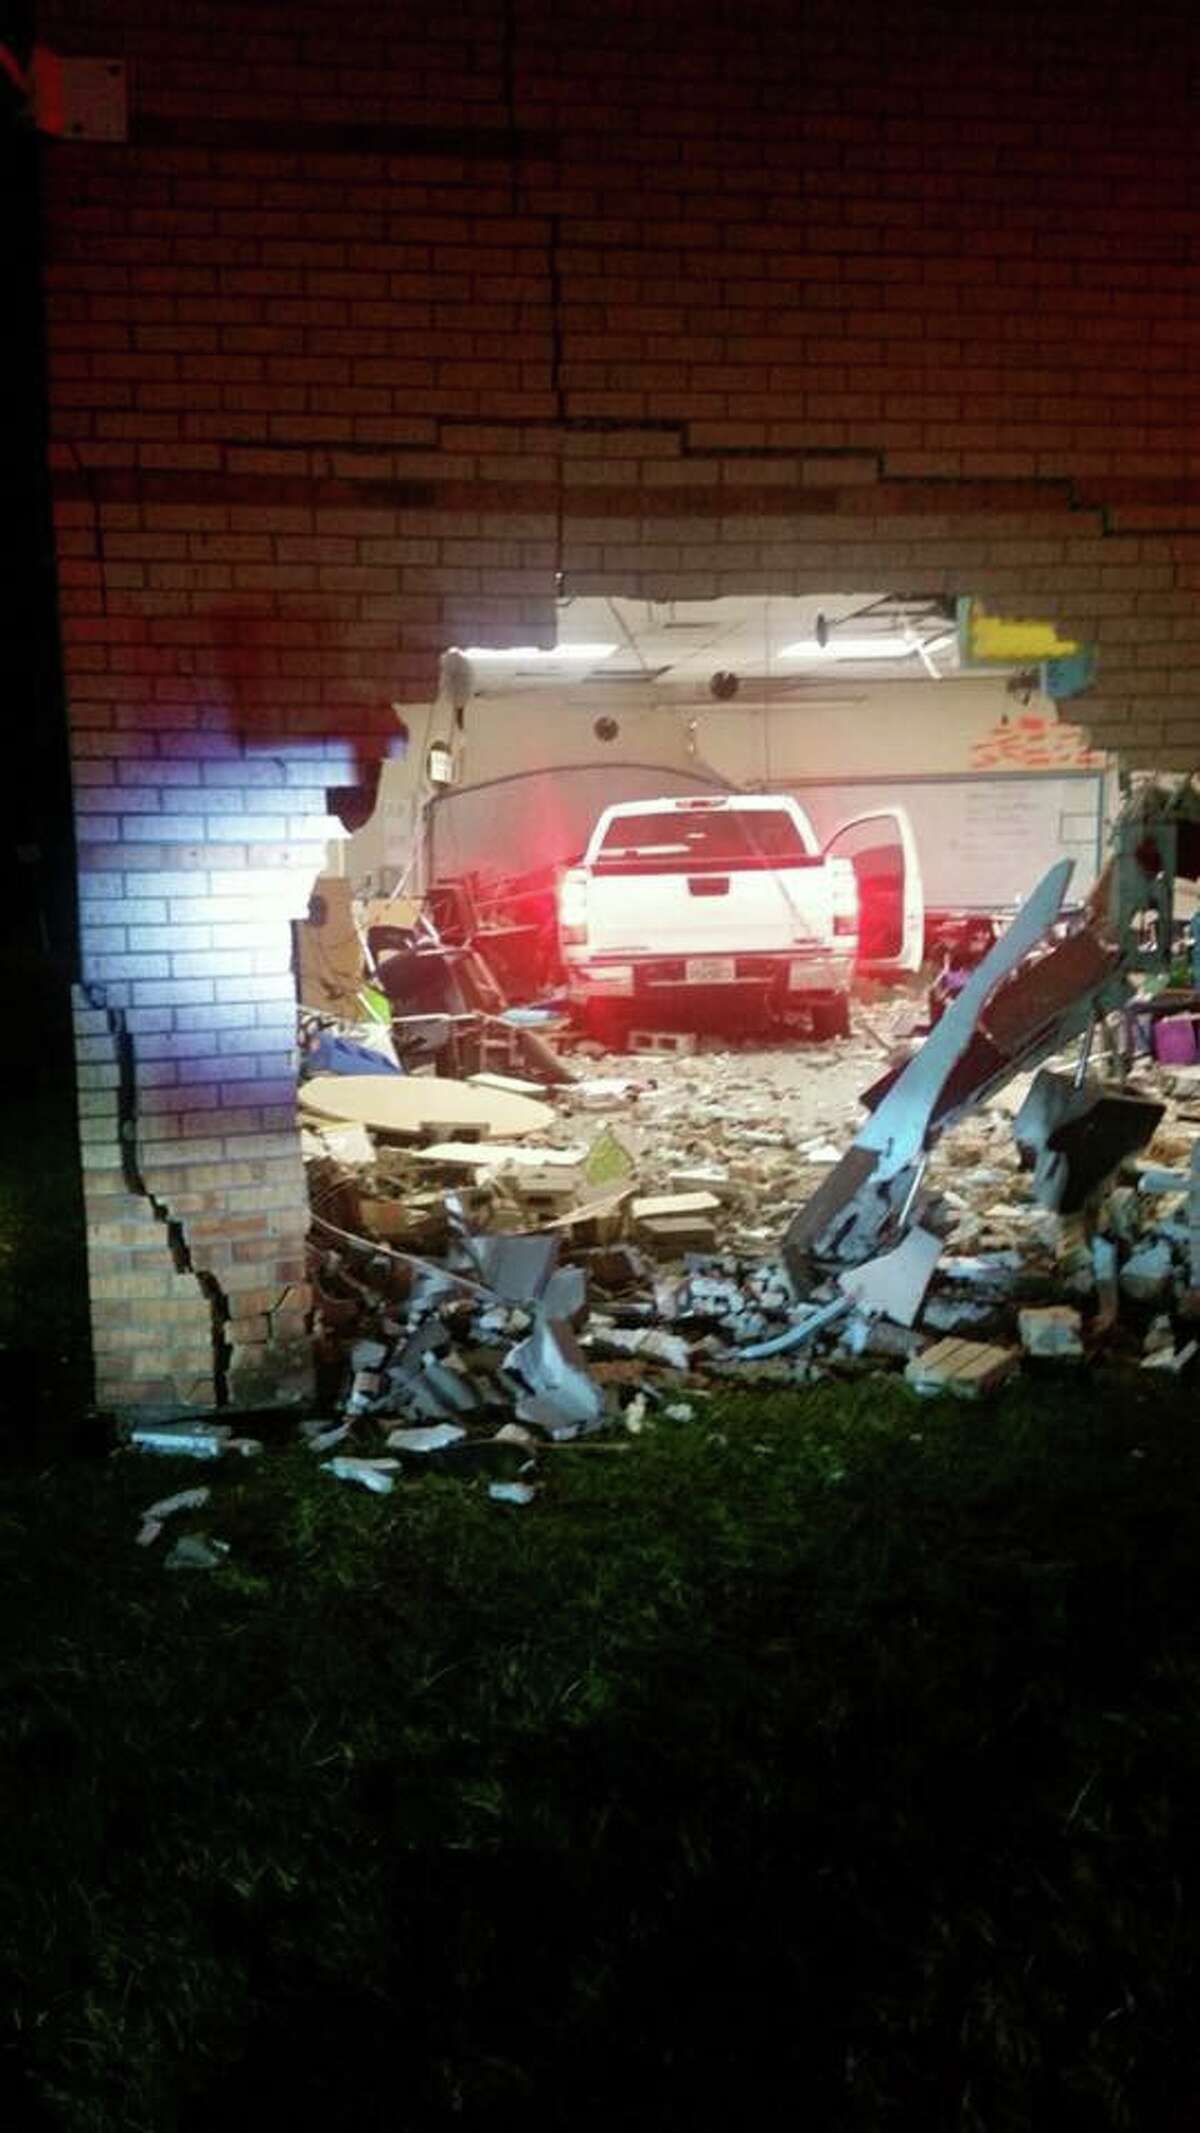 Two classrooms at Pietzsch-MacArthur Elementary were damaged when a truck crashed into the school Friday night.